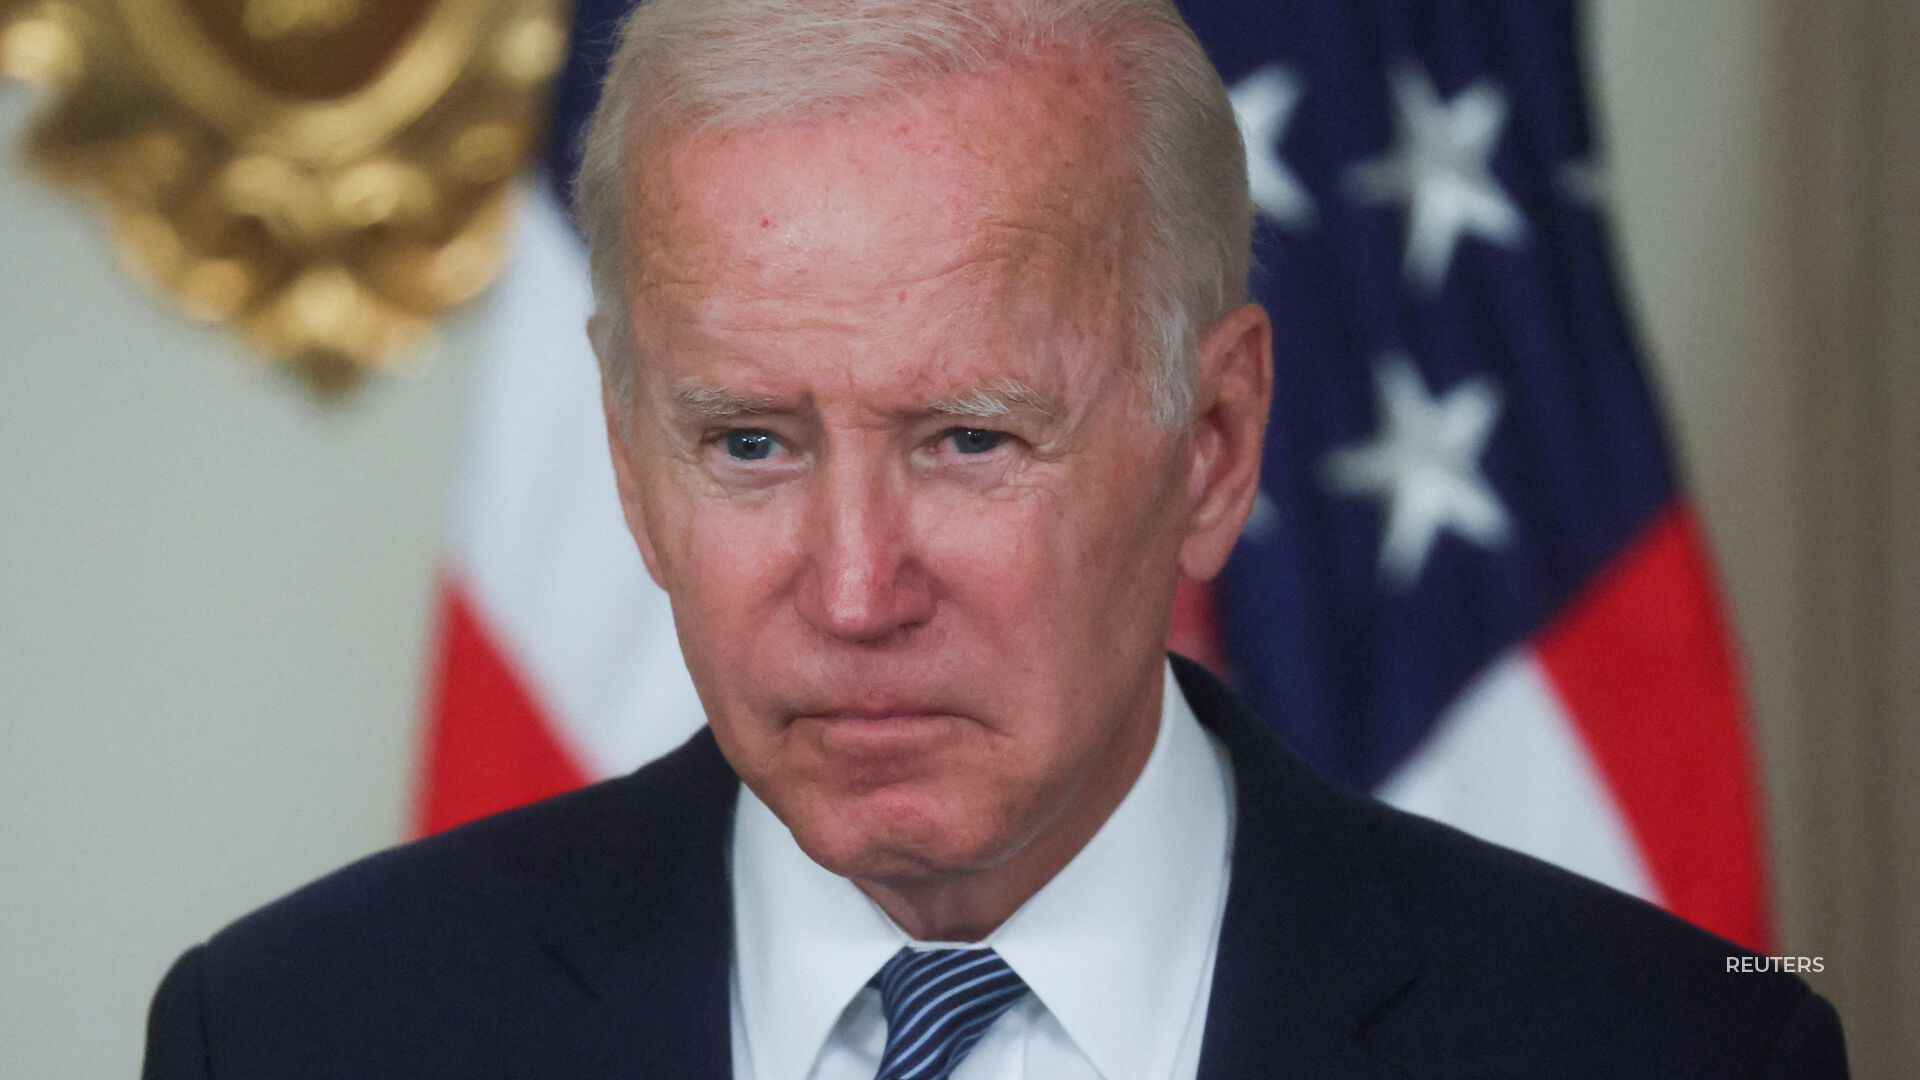 President Biden is expected to make a major announcement regarding student loan forgiveness on Wednesday, reportedly ,000 per borrower forgiven.